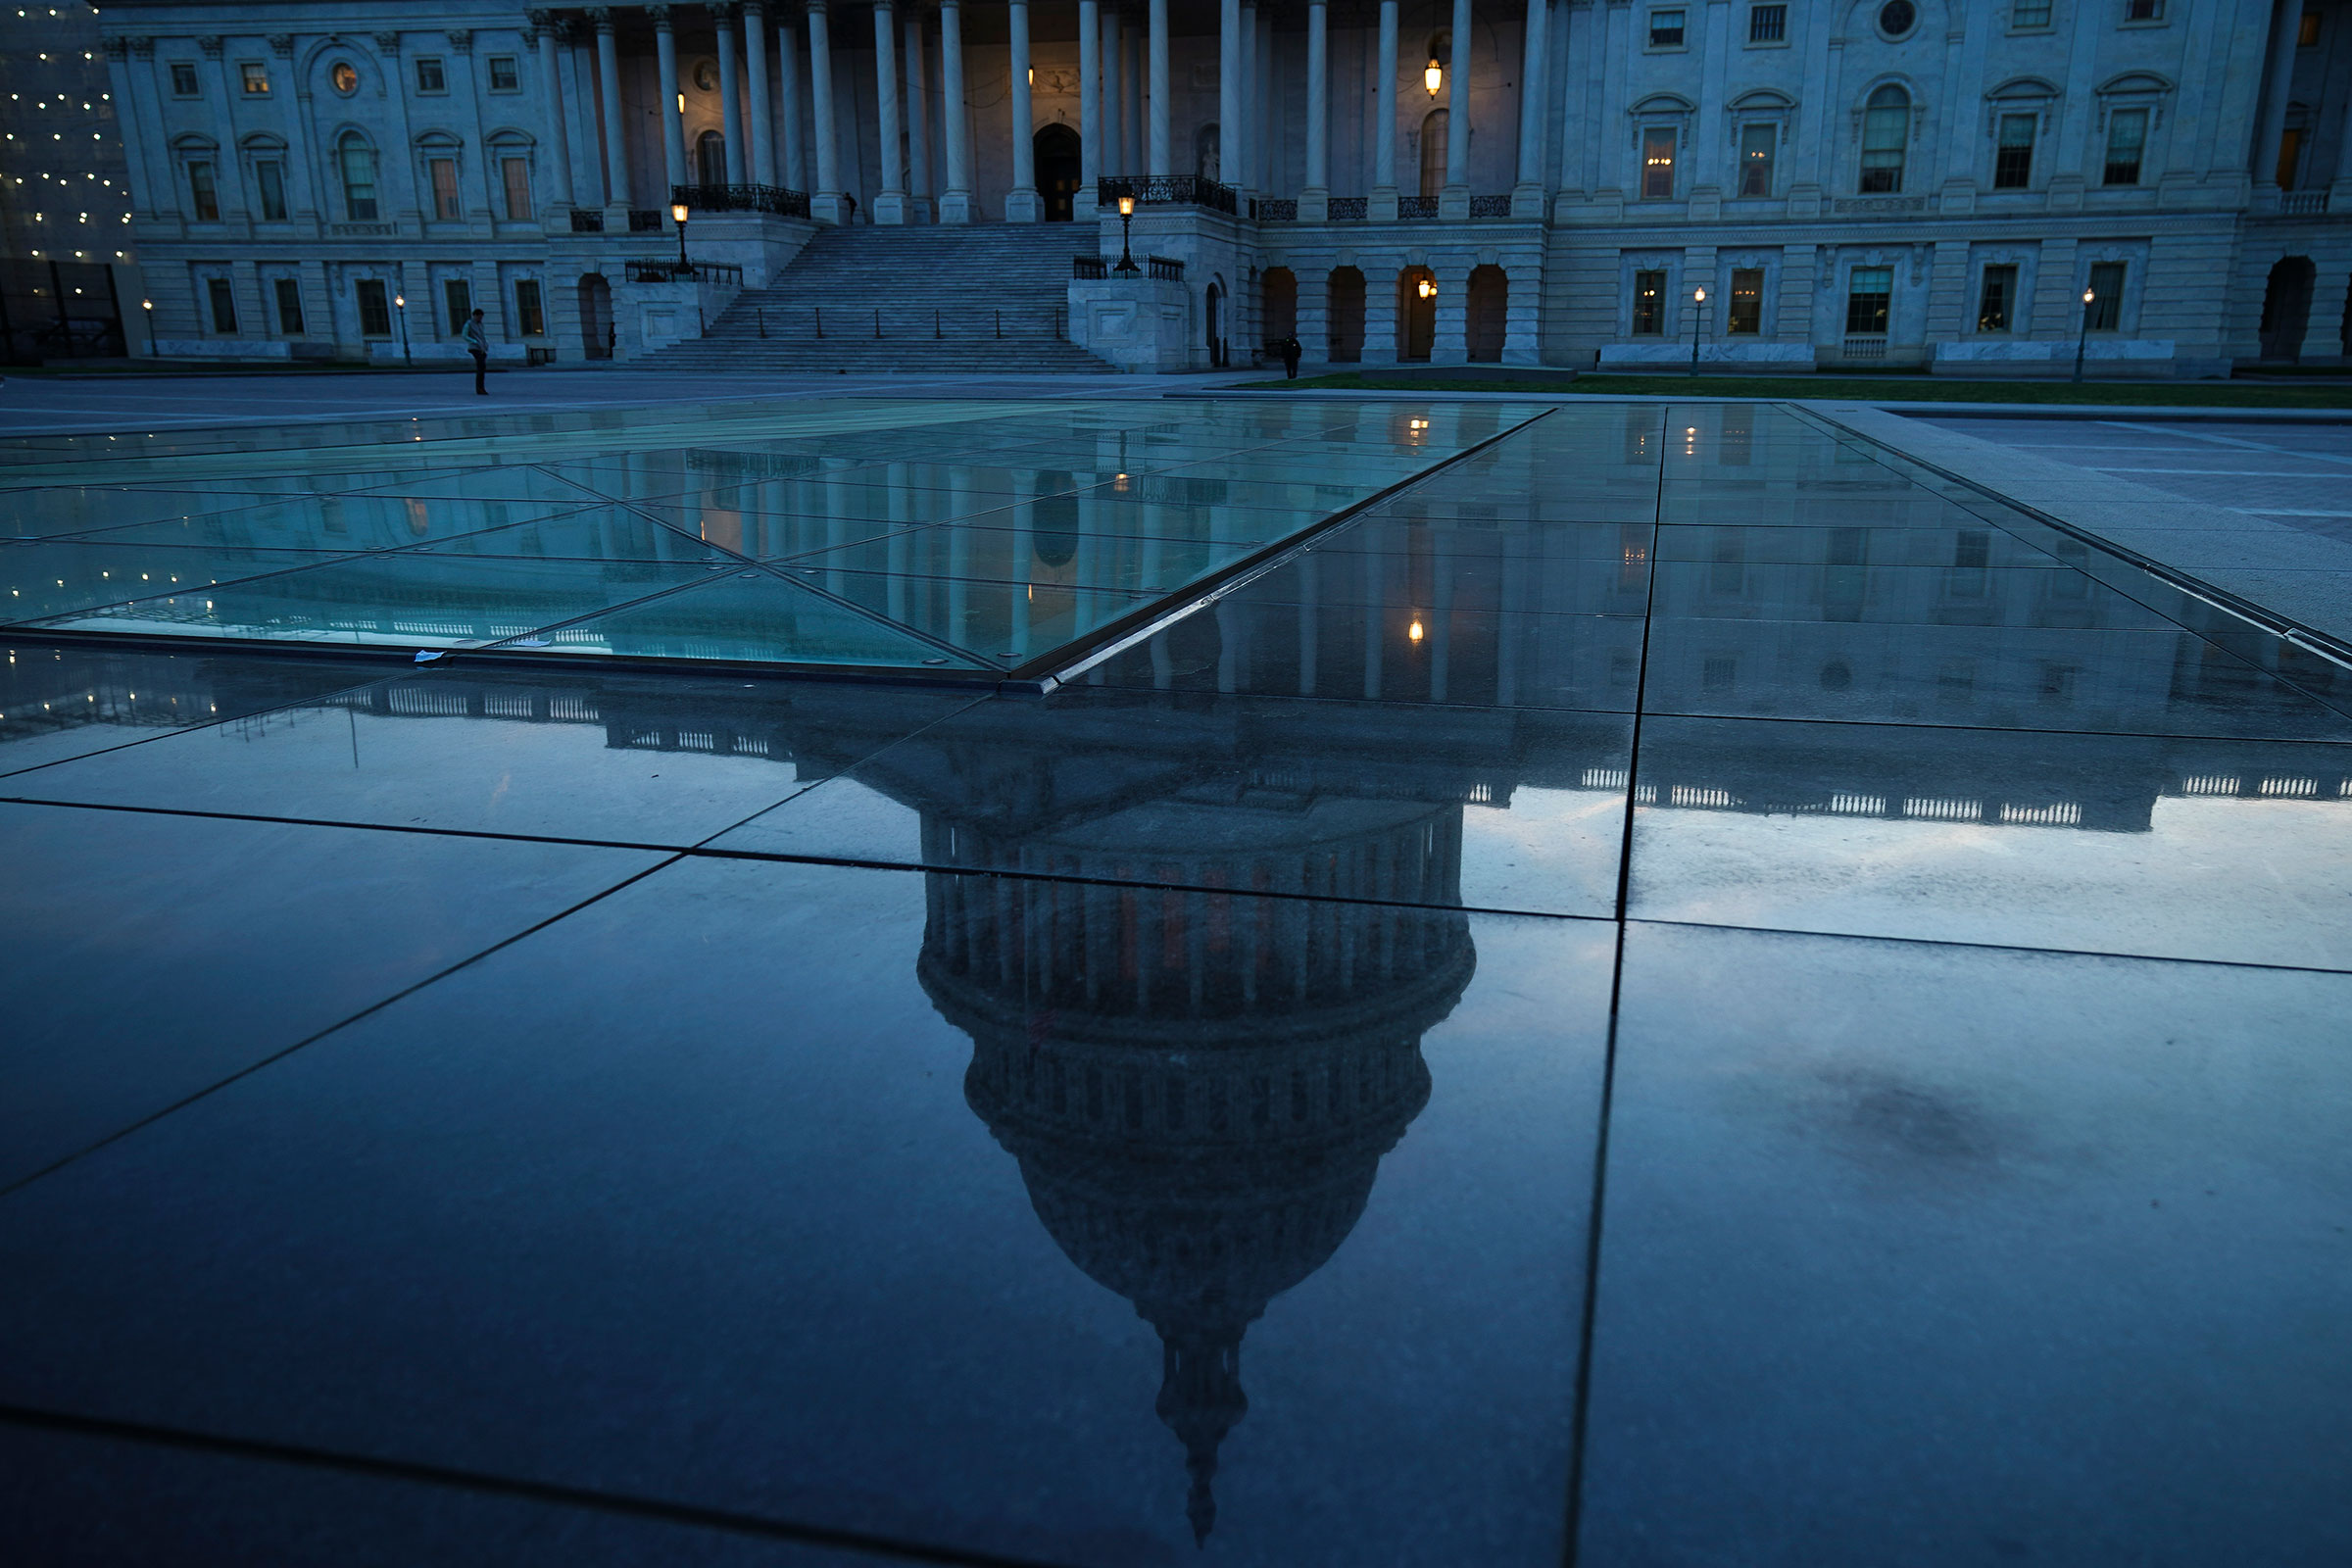 The U.S. Capitol dome is reflected on the plaza of the East Front of the U.S. Capitol, in Washington, DC on April 17, 2019. (Drew Angerer—Getty Images)